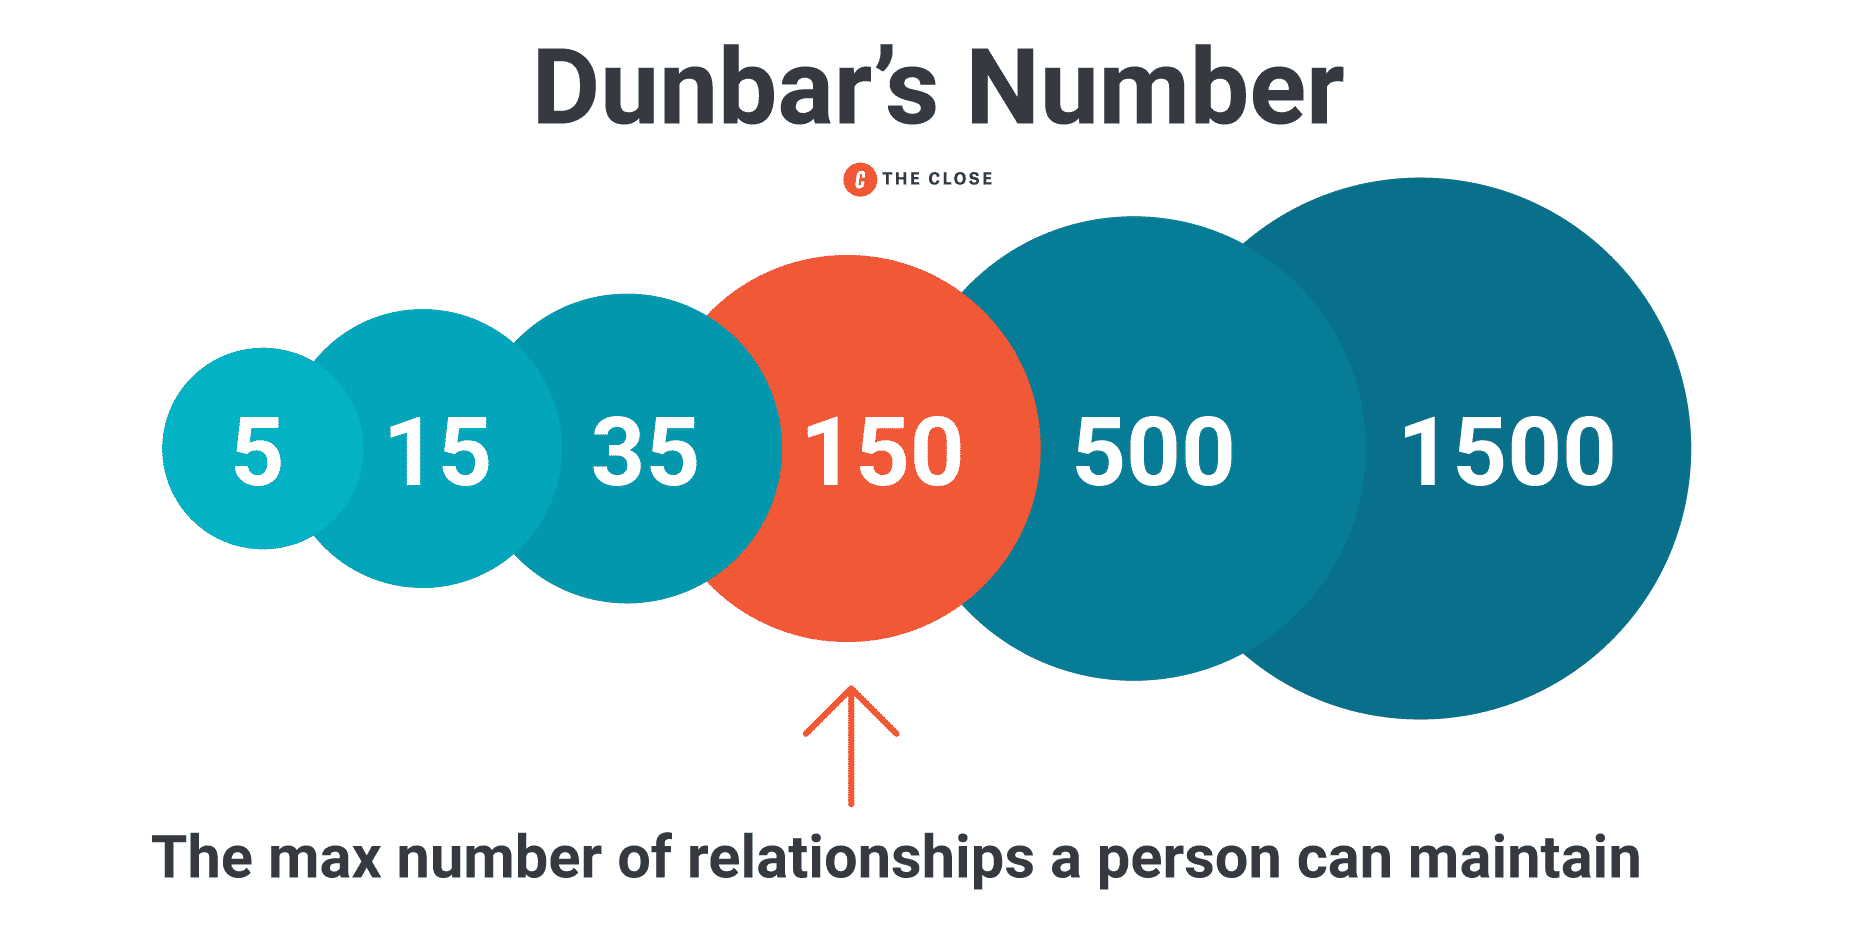 Infographic depicting Dunbar's Number: the maximum number of relationships a person can maintain